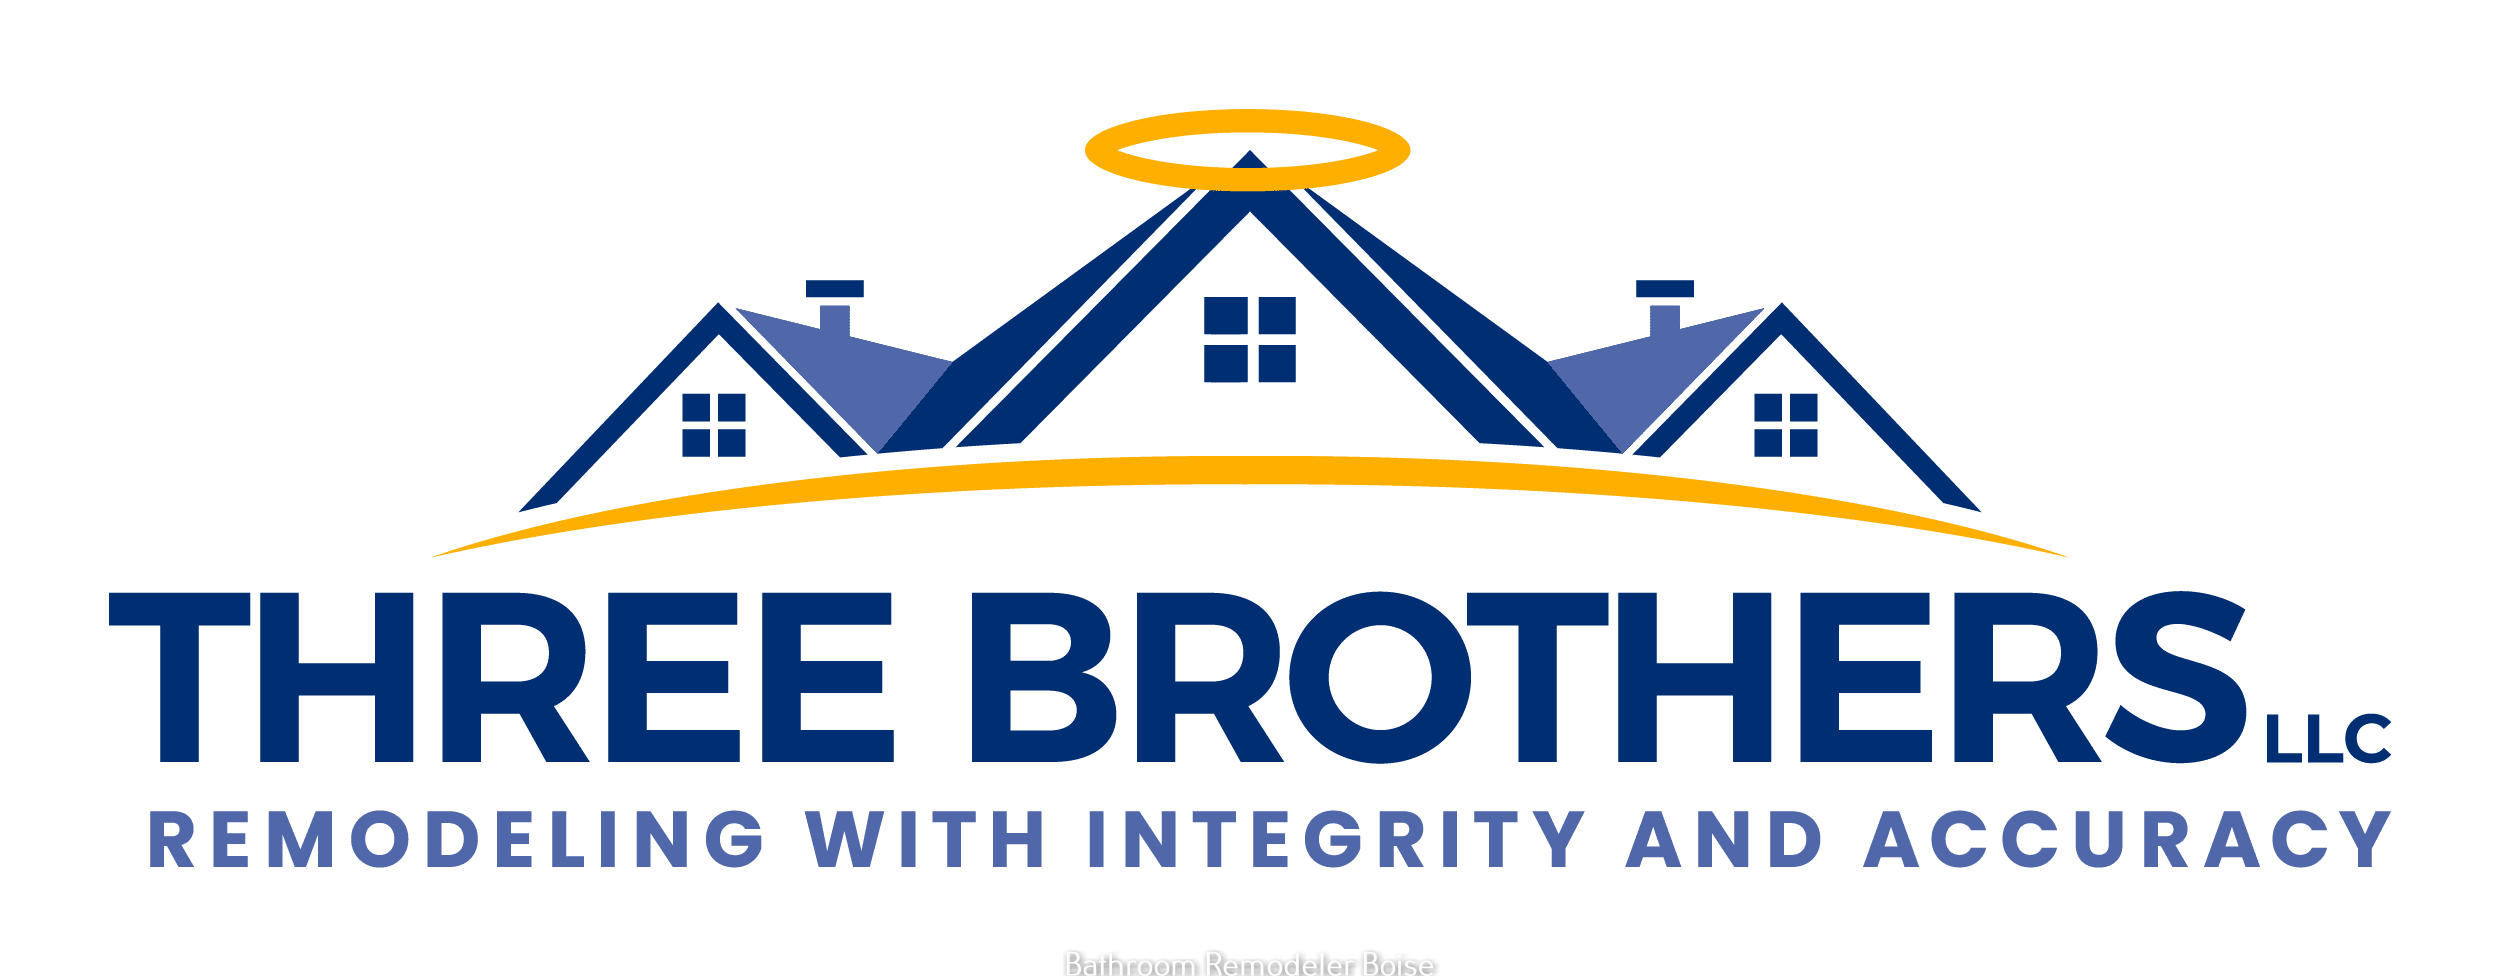 Three Brothers LLC - Boise Explains Why It’s the Leading Bathroom Remodelers